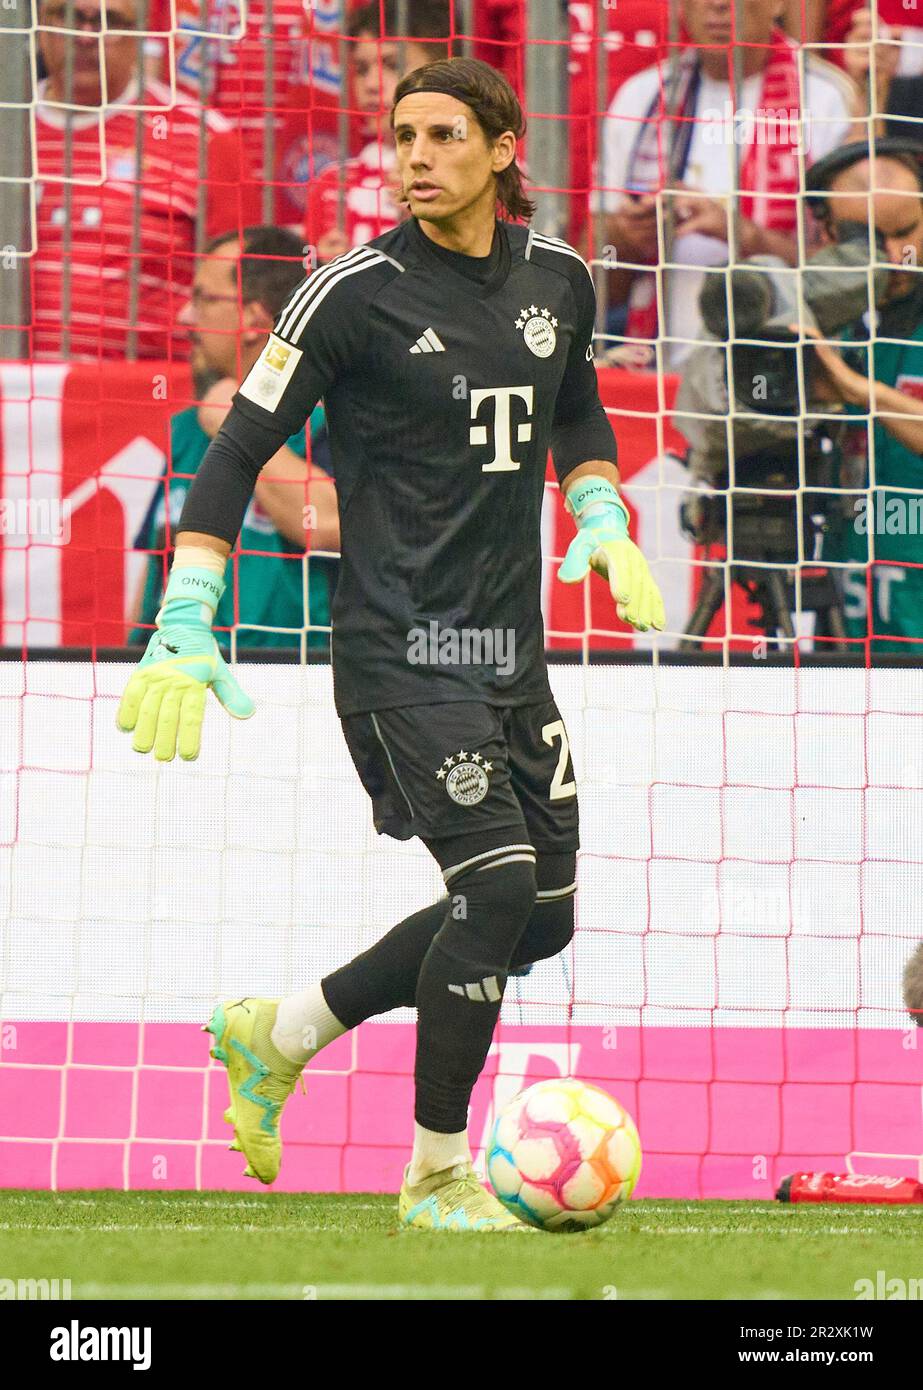 Yann Sommer, FCB 27 goalkeeper   in the match FC BAYERN MUENCHEN - RB LEIPZIG 1-3 1.German Football League on May 20, 2023 in Munich, Germany. Season 2022/2023, matchday 33, 1.Bundesliga, FCB, München, 33.Spieltag. © Peter Schatz / Alamy Live News    - DFL REGULATIONS PROHIBIT ANY USE OF PHOTOGRAPHS as IMAGE SEQUENCES and/or QUASI-VIDEO - Stock Photo